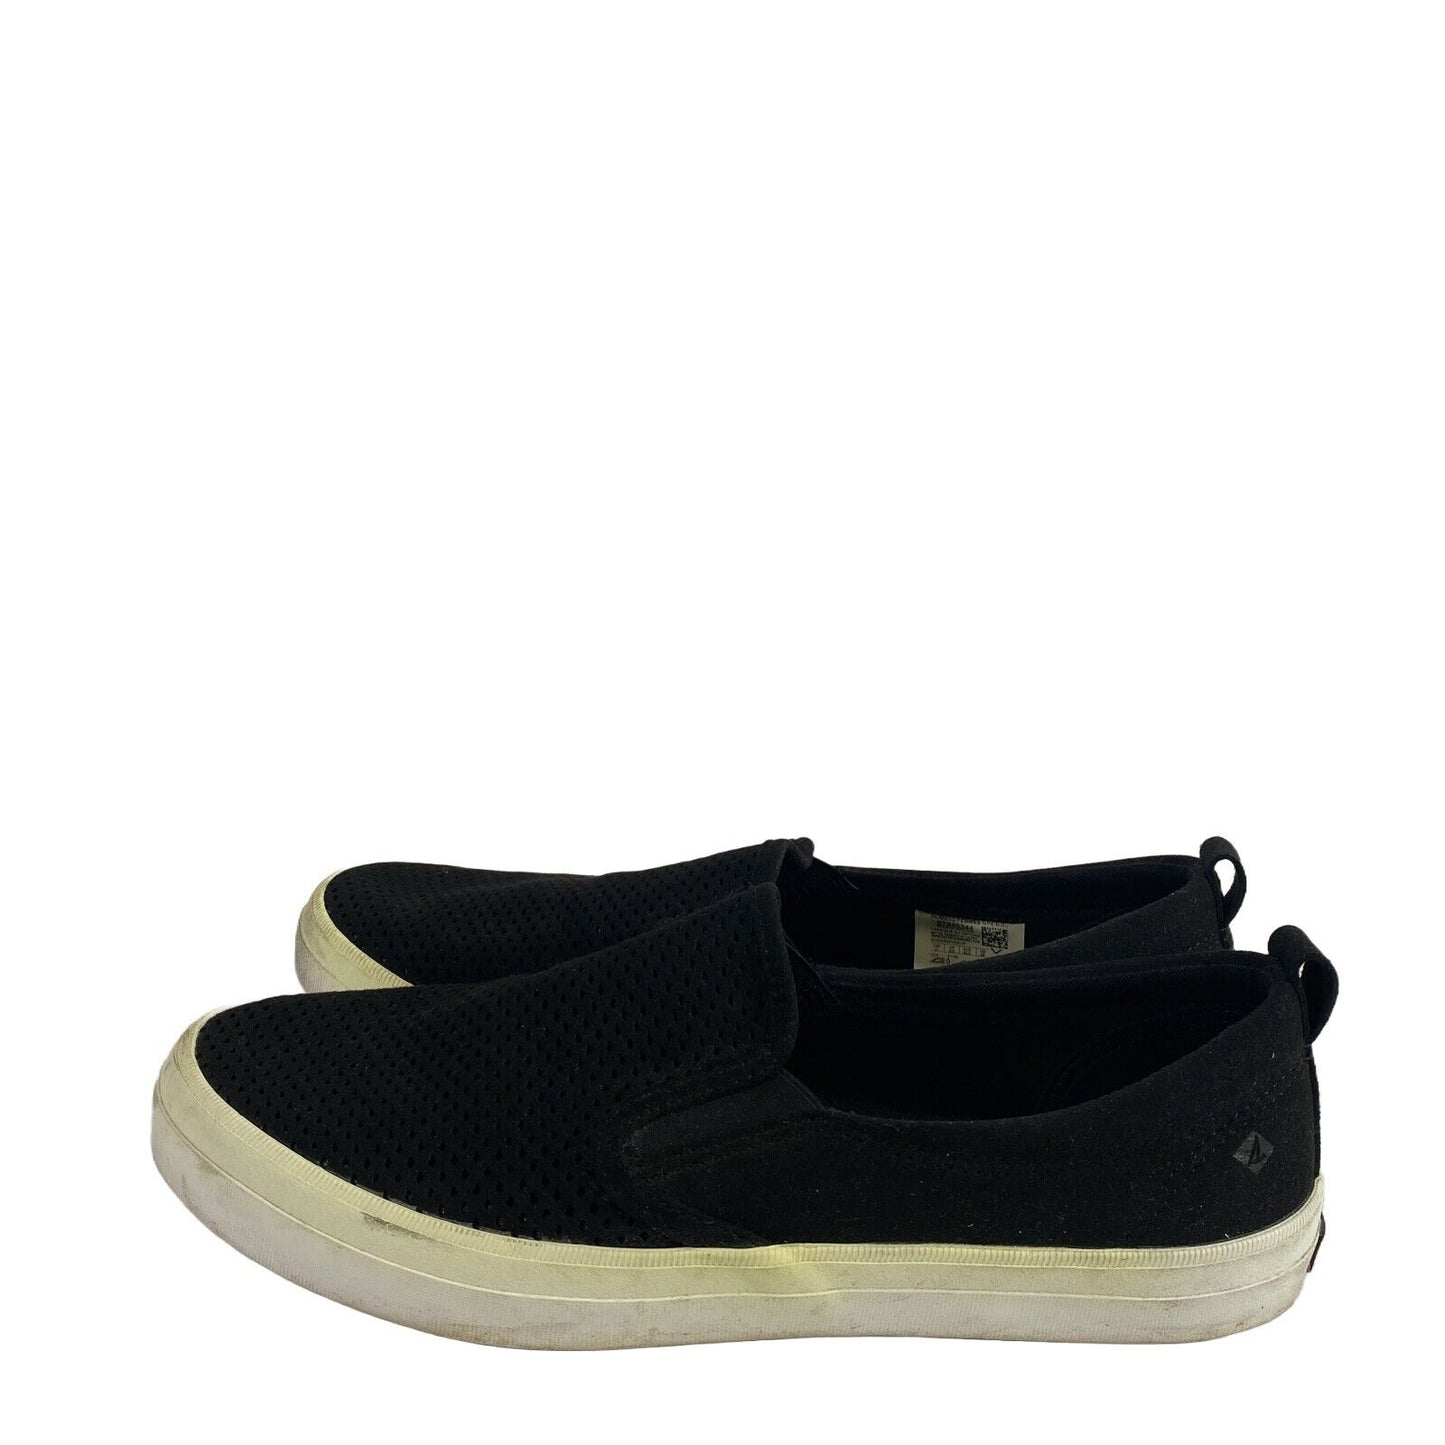 Sperry Women's Black Suede Slip On Perforated Casual Sneakers 11